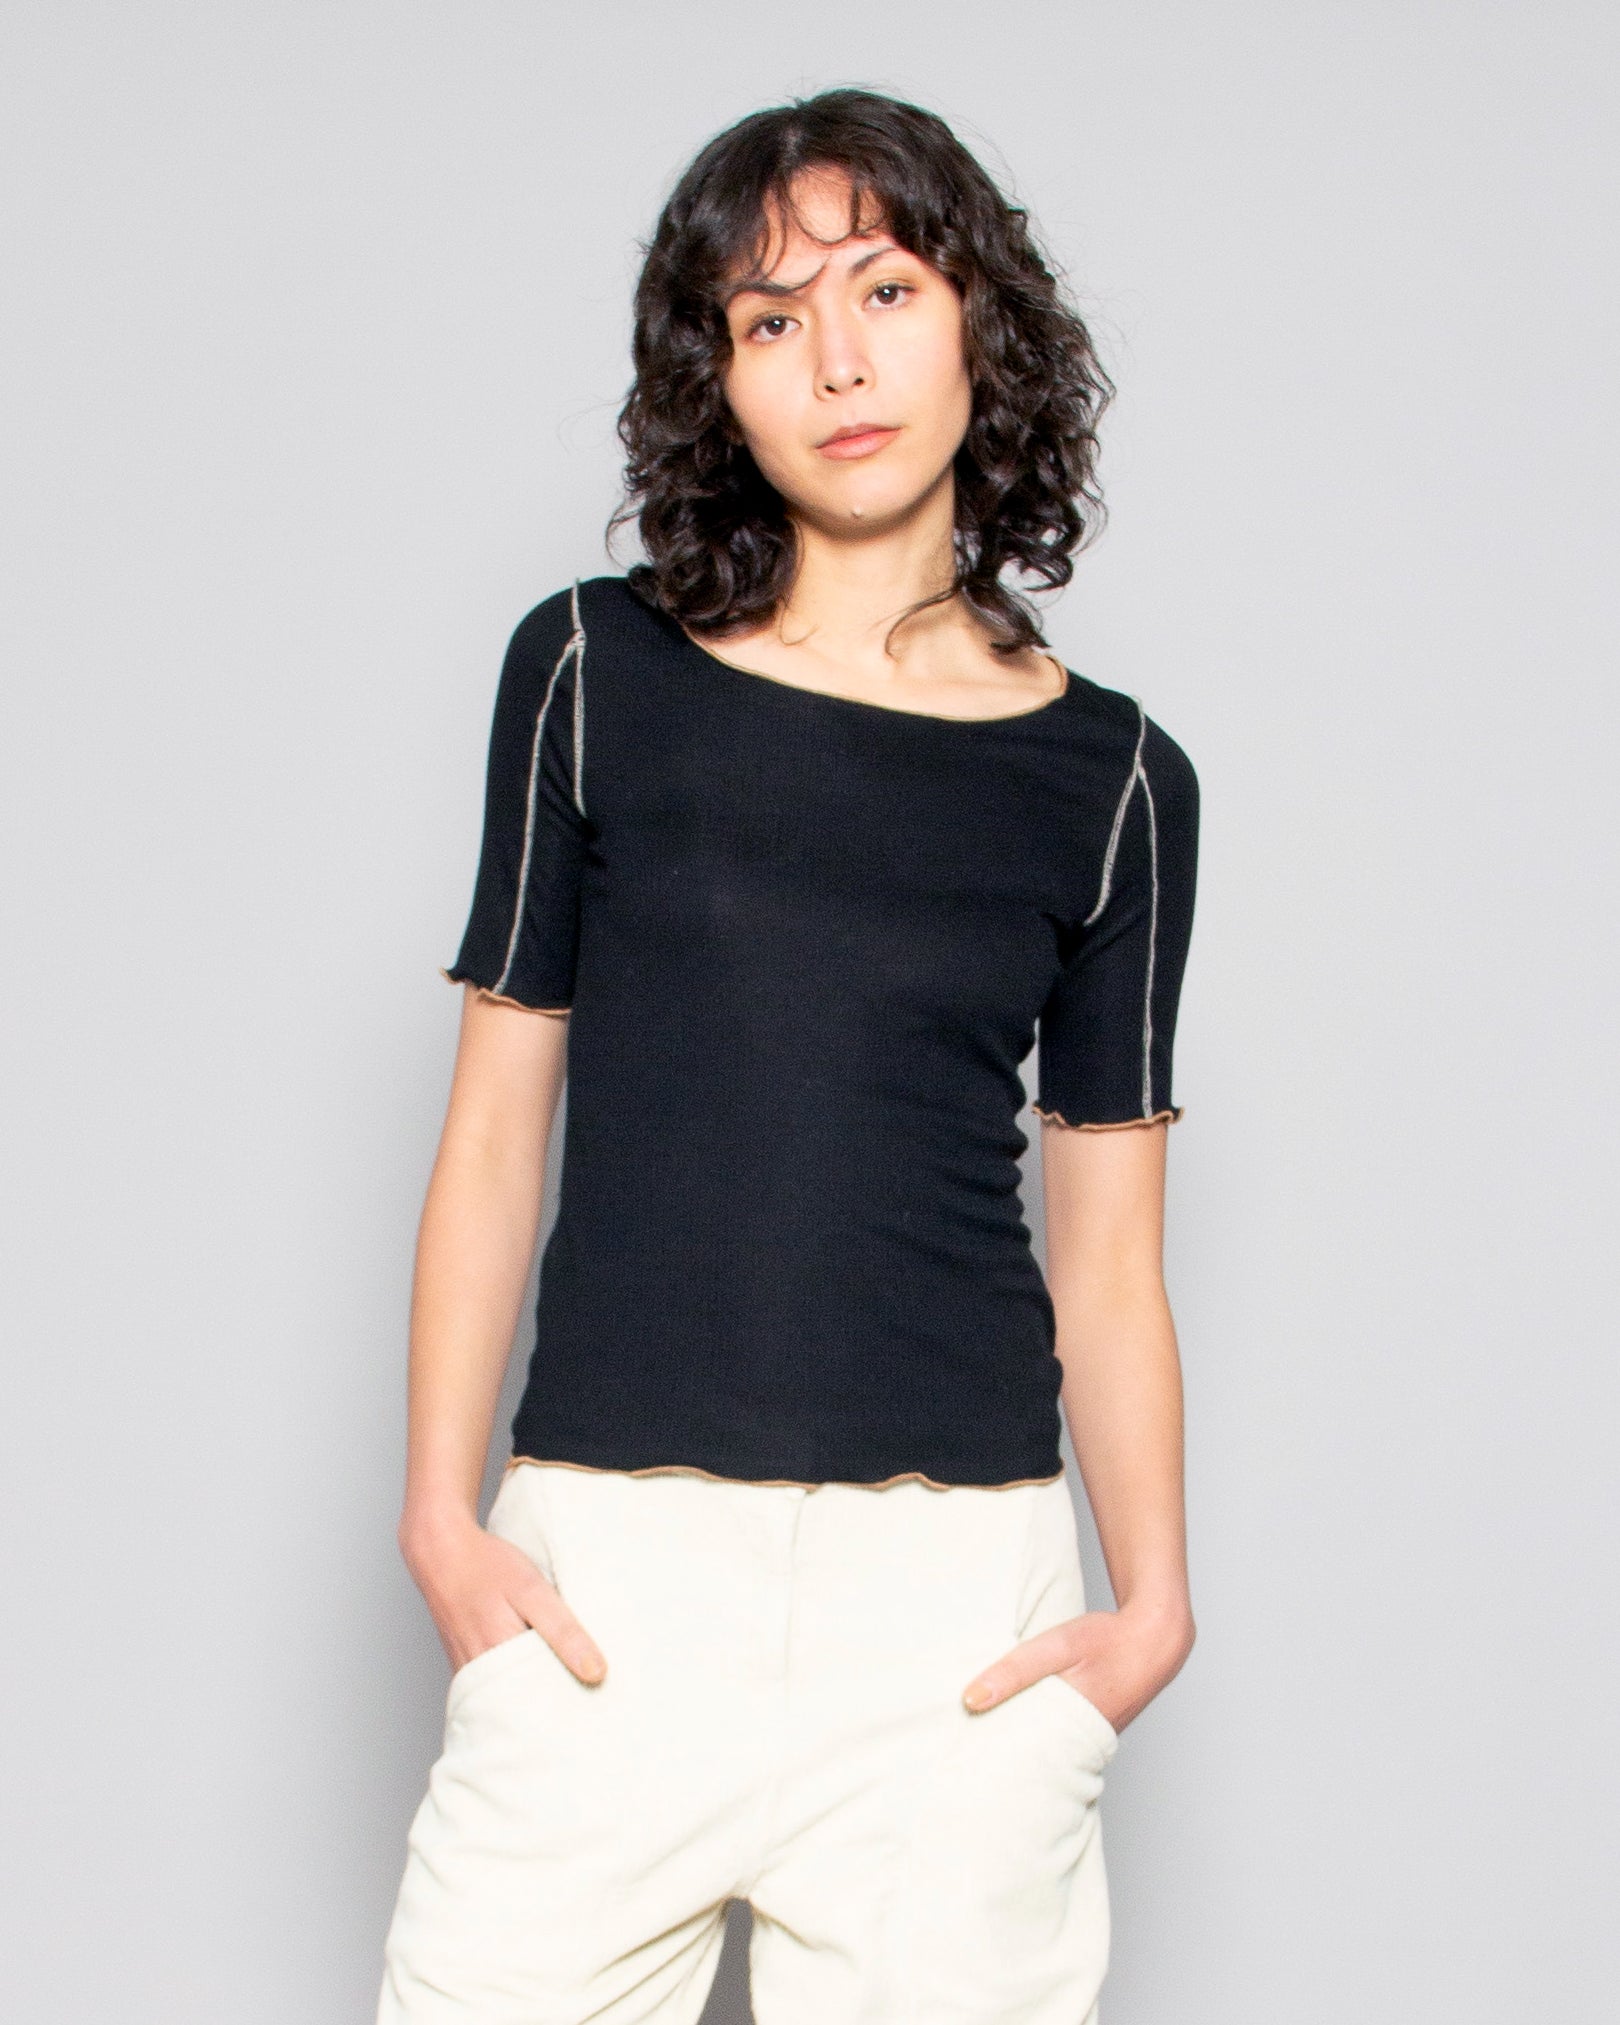 PERSONS Hayes Contrast Rib Tee in Black available at Lahn.shop